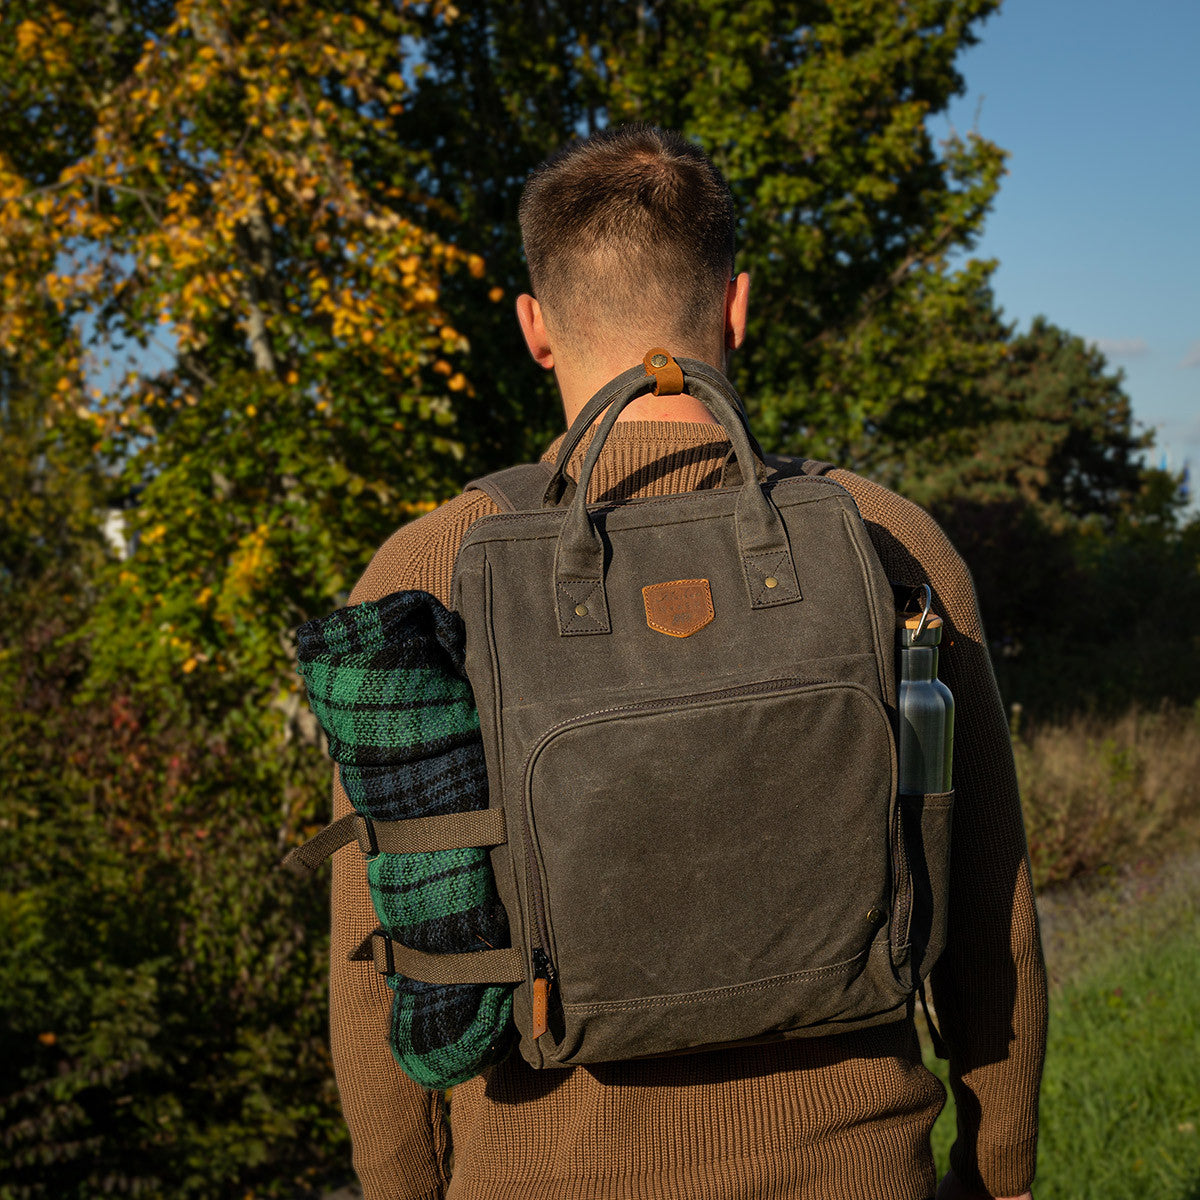 Waxed canvas picnic packpack cooler shown on the back of a man with picnic blacnket and water bottle.